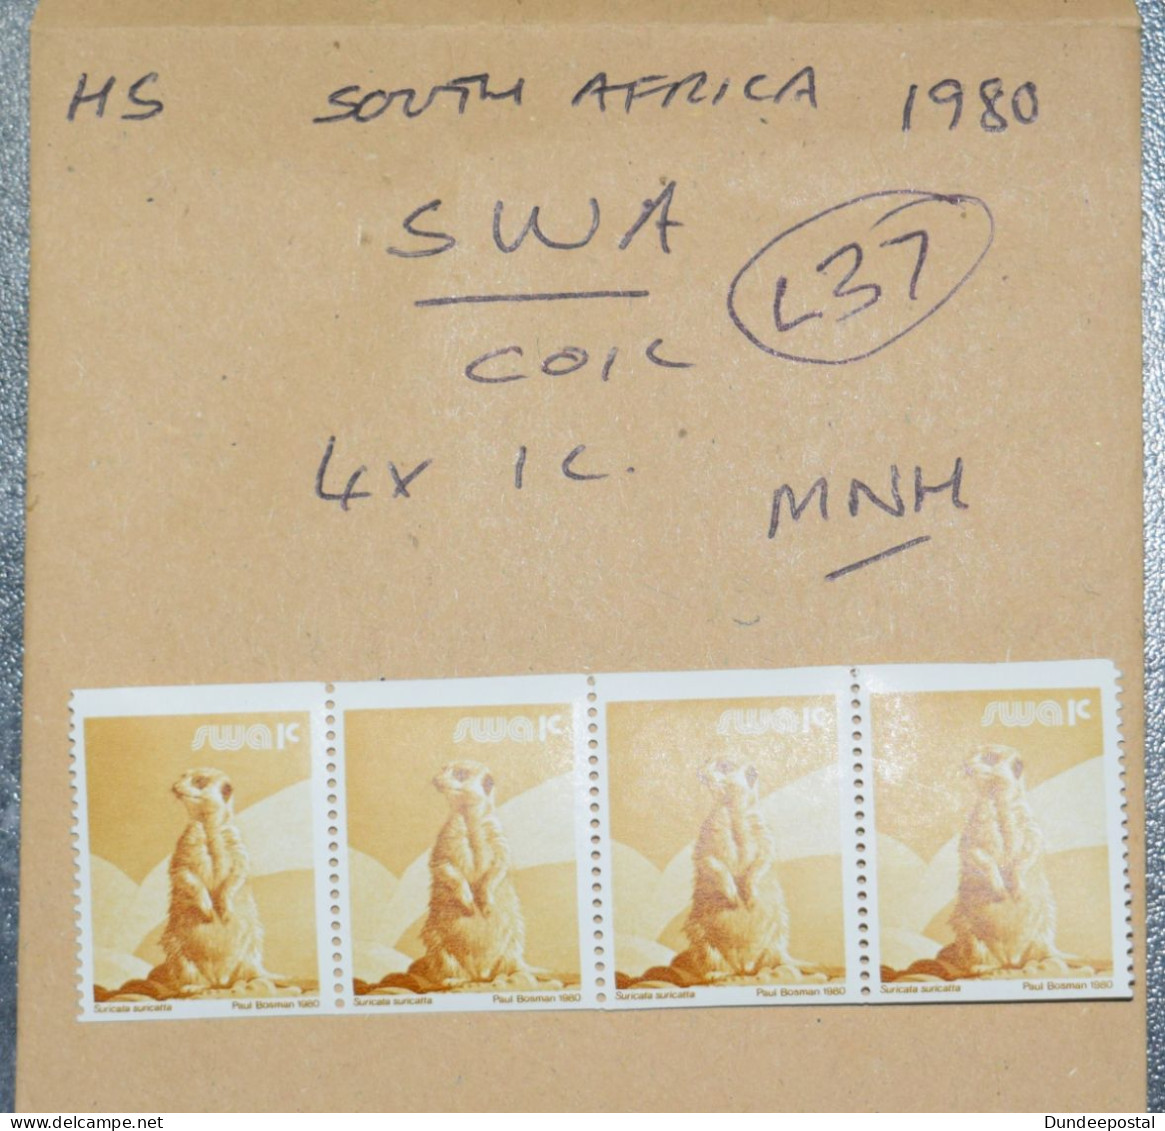 SOUTH AFRICA  STAMPS SWA Coil X 4 MNH  1980  L37  ~~L@@K~~ - Nuevos